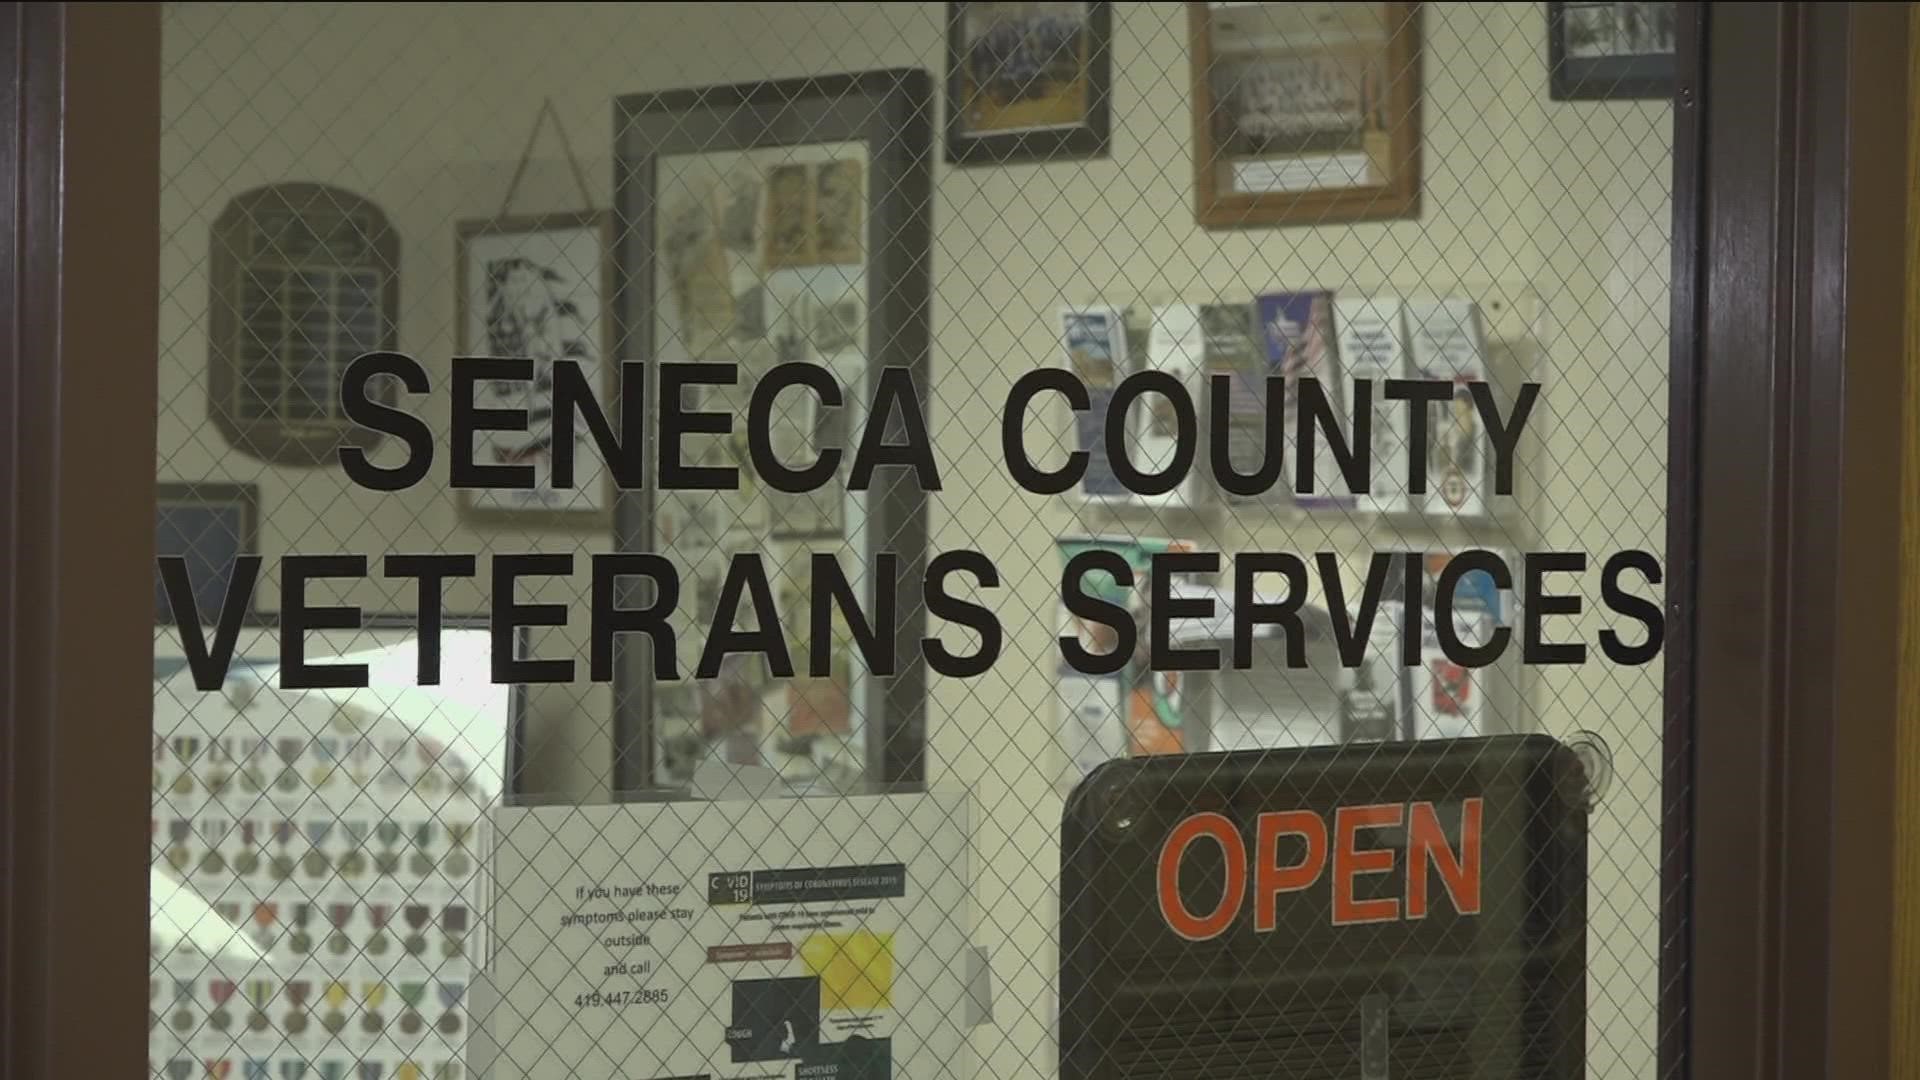 The Seneca County Veterans Services Commission will be handing out free food cards worth $30 to any veteran living in Seneca County at its office.